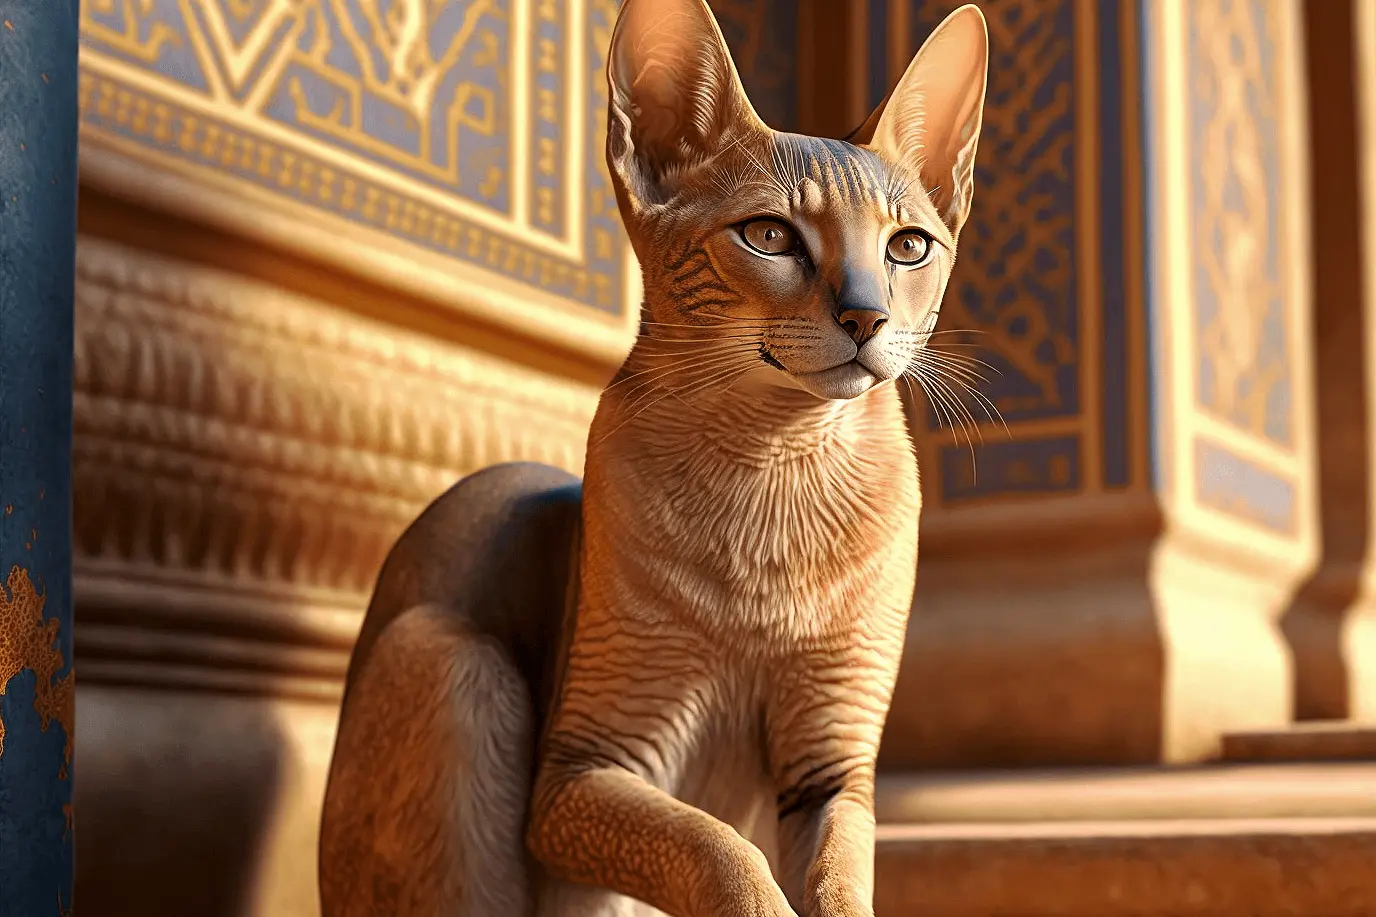 Where Did Cats Come From Egyptian Chausie Cat Inside Ornate Building